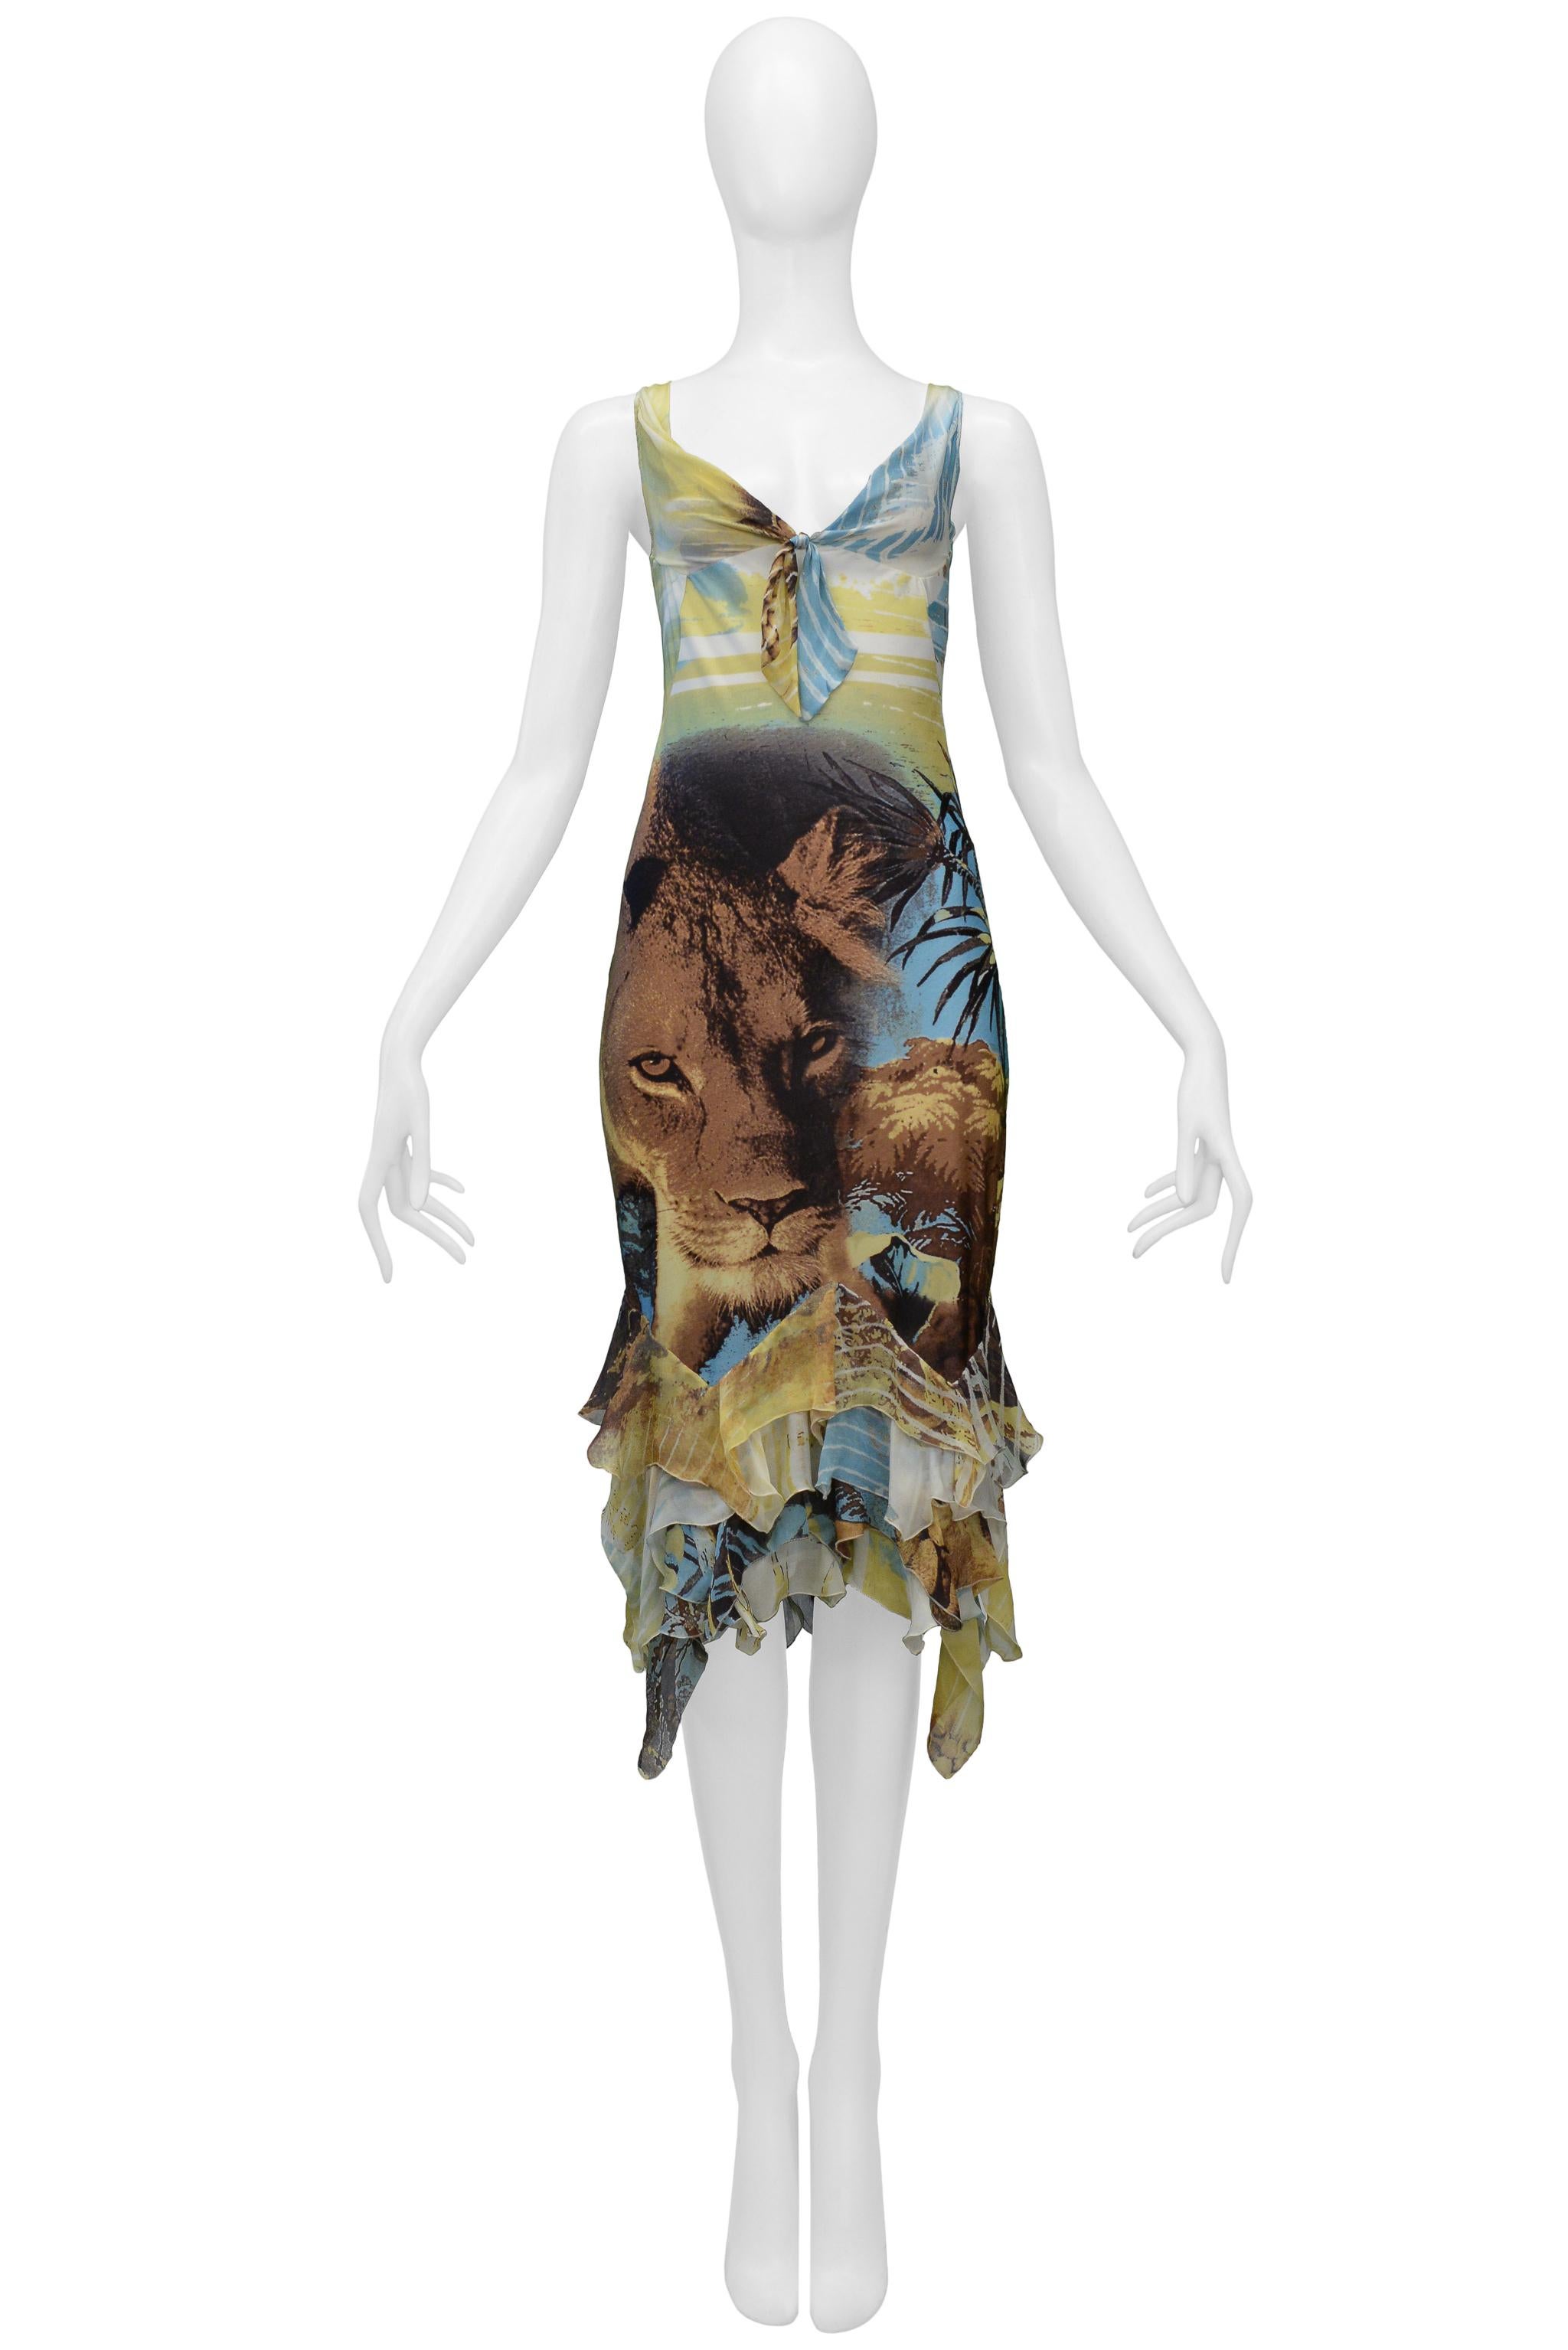 Resurrection Vintage is excited to present a vintage Roberto Cavalli blue and yellow silk and nylon dress featuring a bold lion head print, tie front, chiffon ruffles, and knee-length. 

Roberto Cavalli
Size: Medium
Silk and Nylon Jersey
Excellent